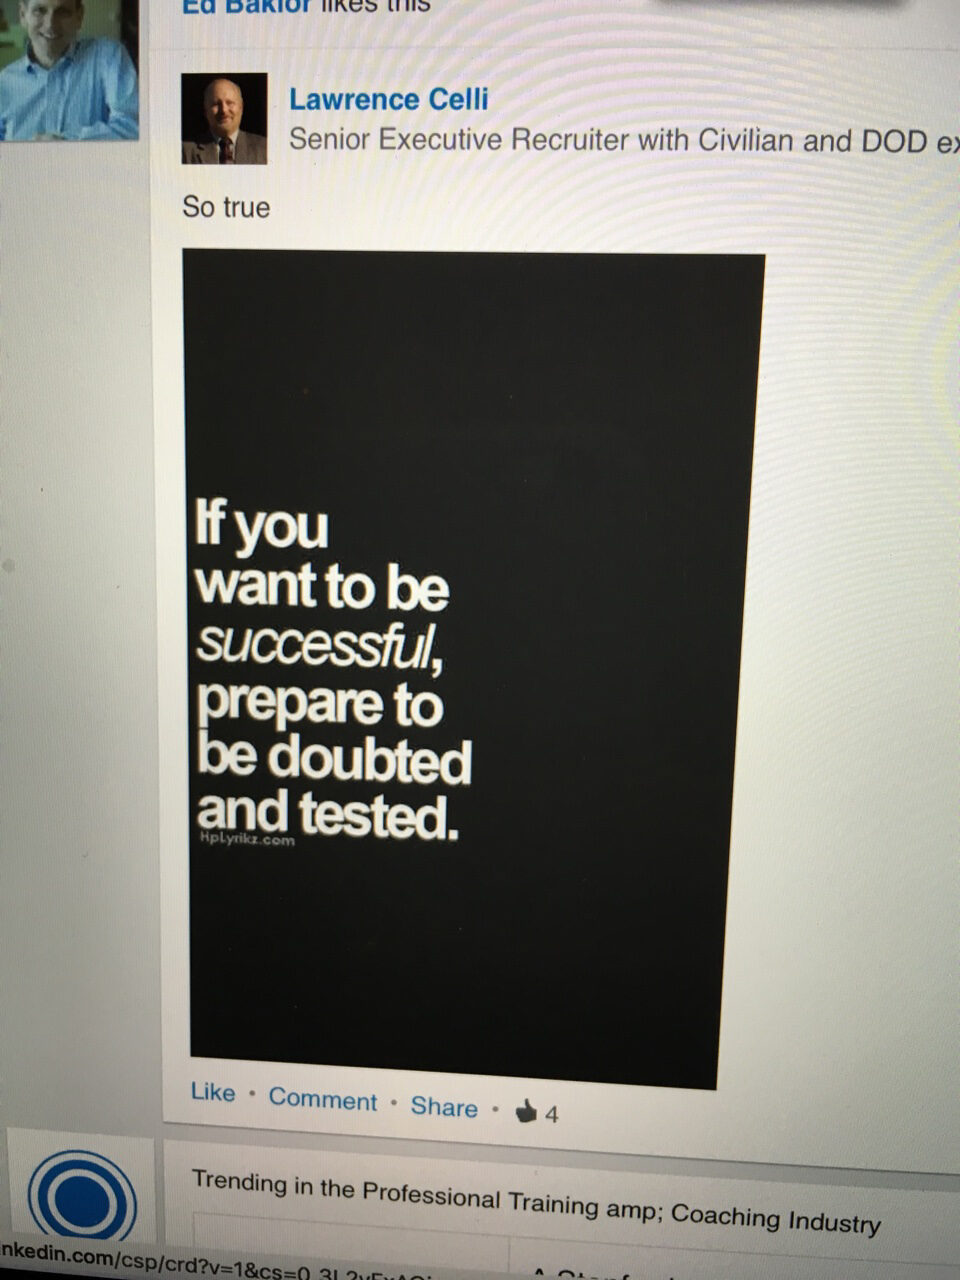 Social media post about being successful